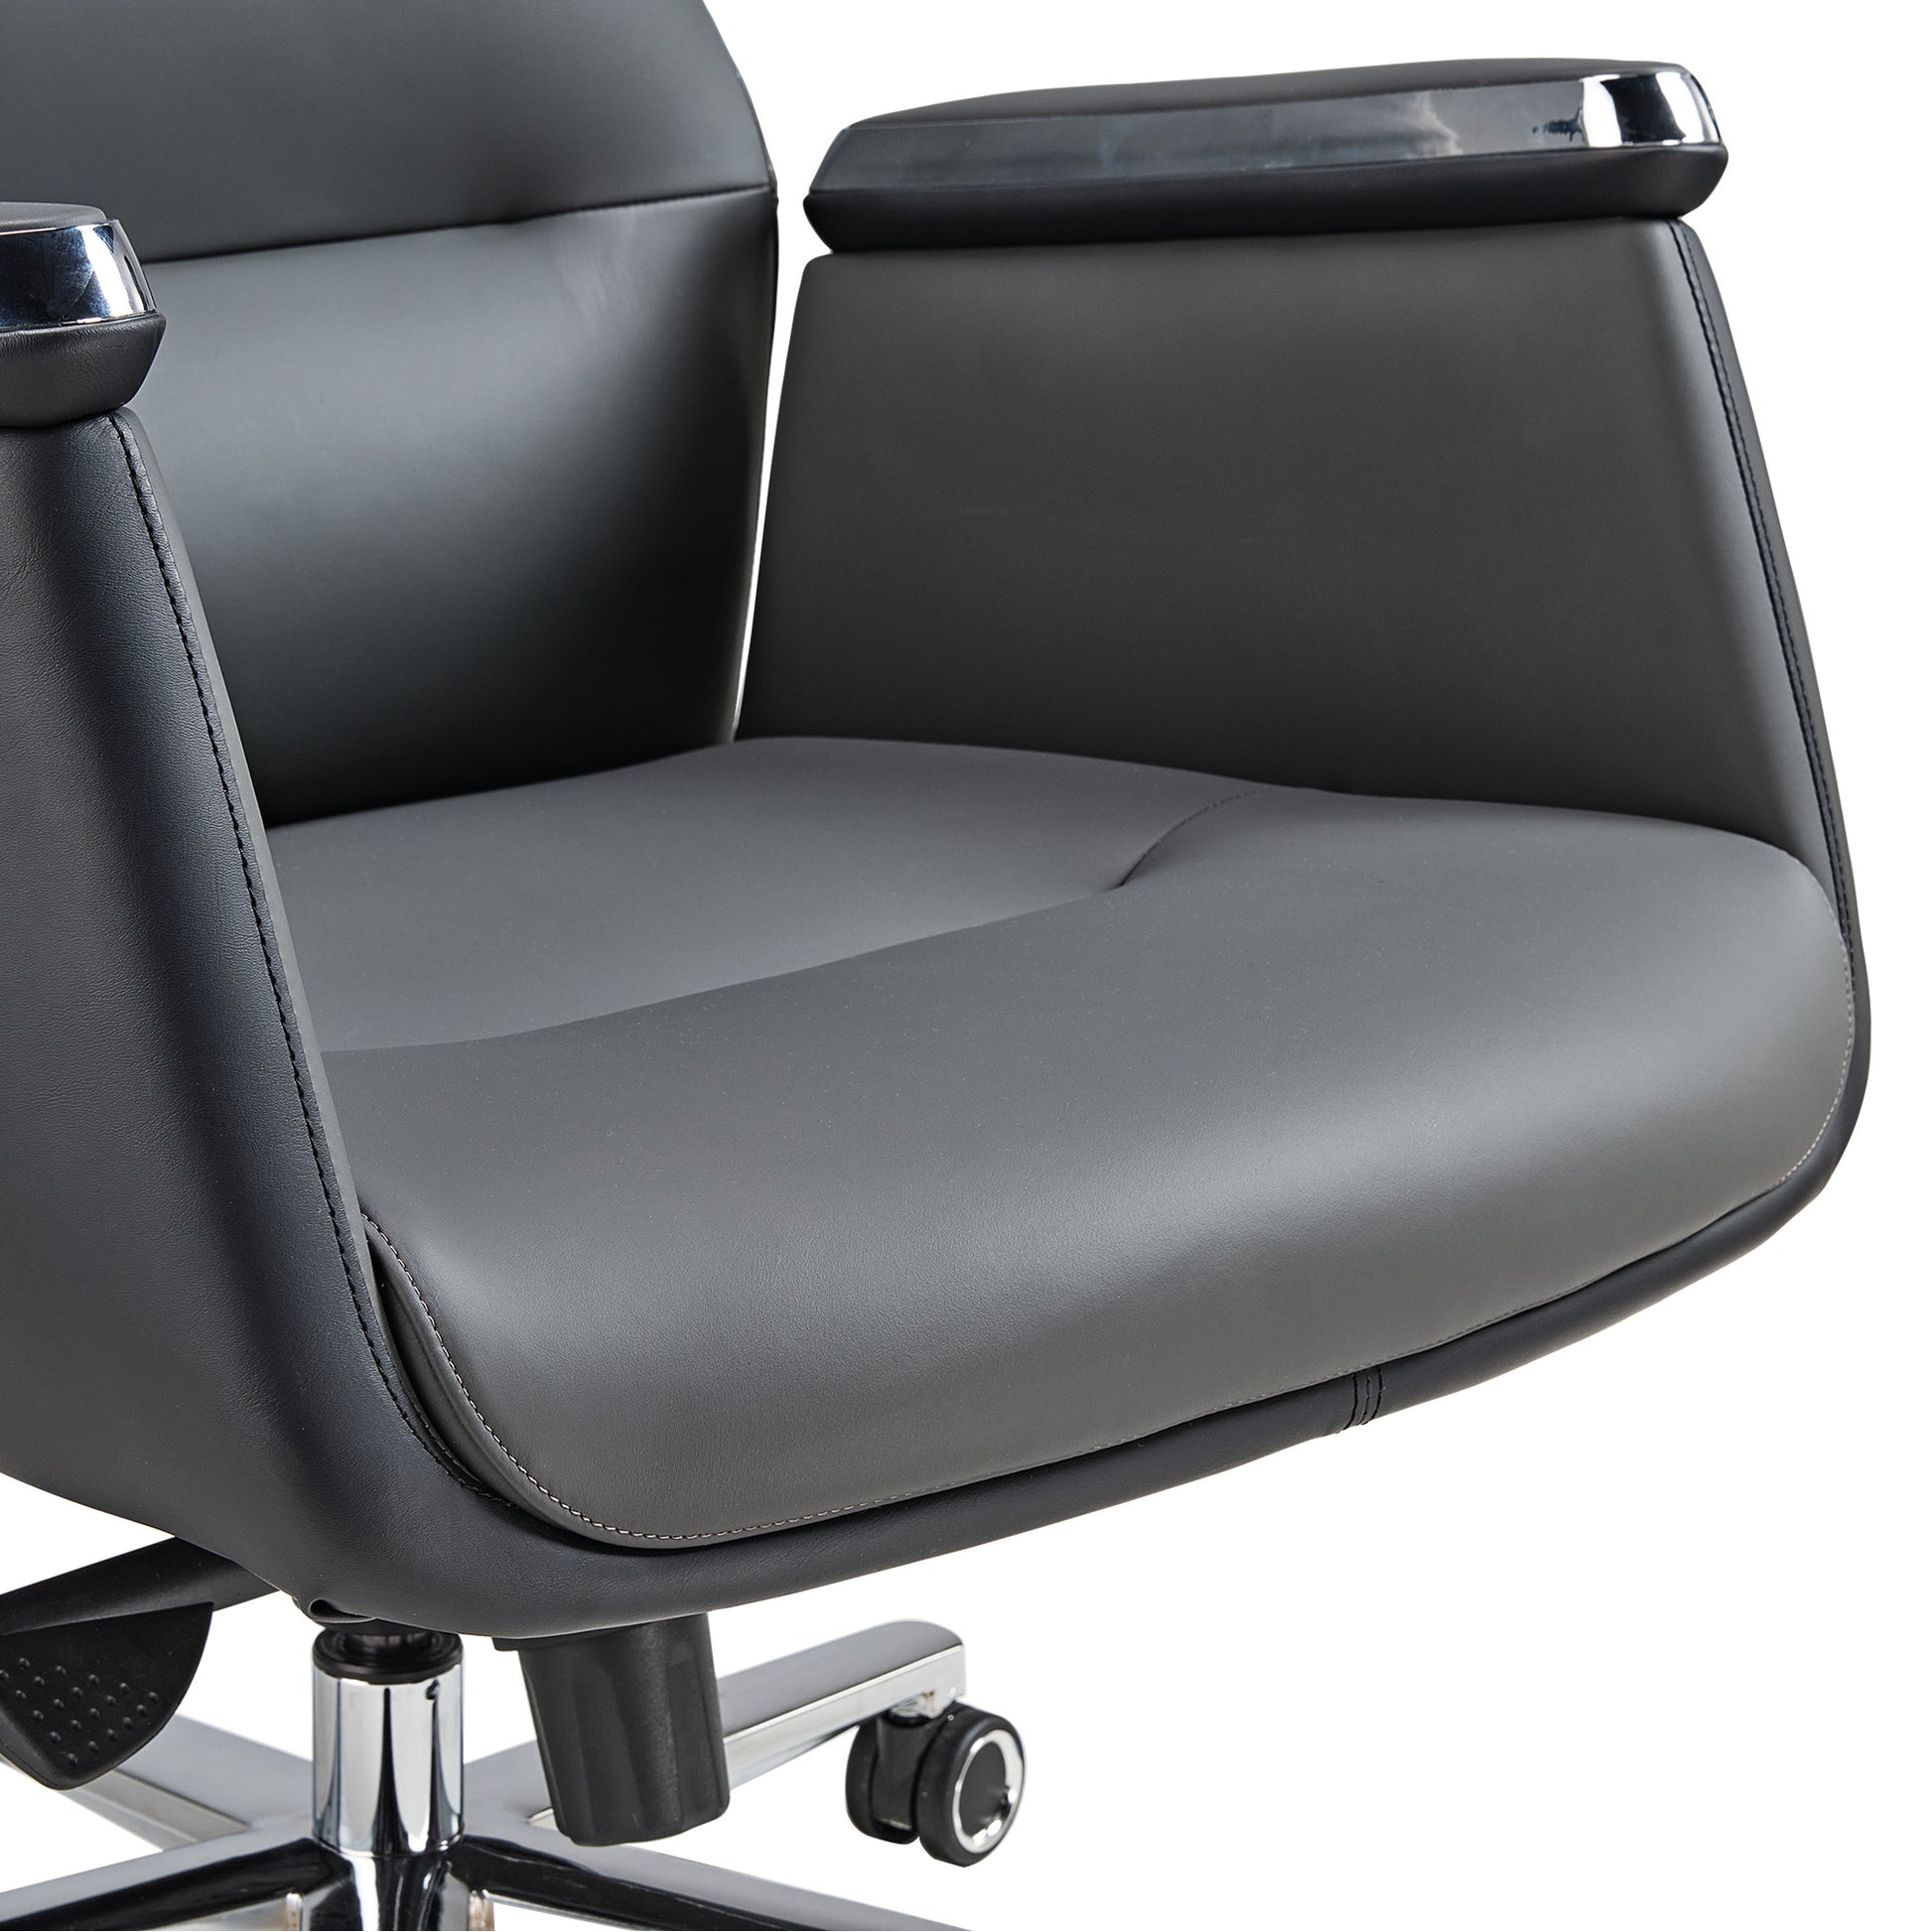 Eureka Royal II, Executive Leather Office Chair, Comfy Leather Executive Office Chair with High Back and Lumbar Support, Iron Gray, Padded Cushion